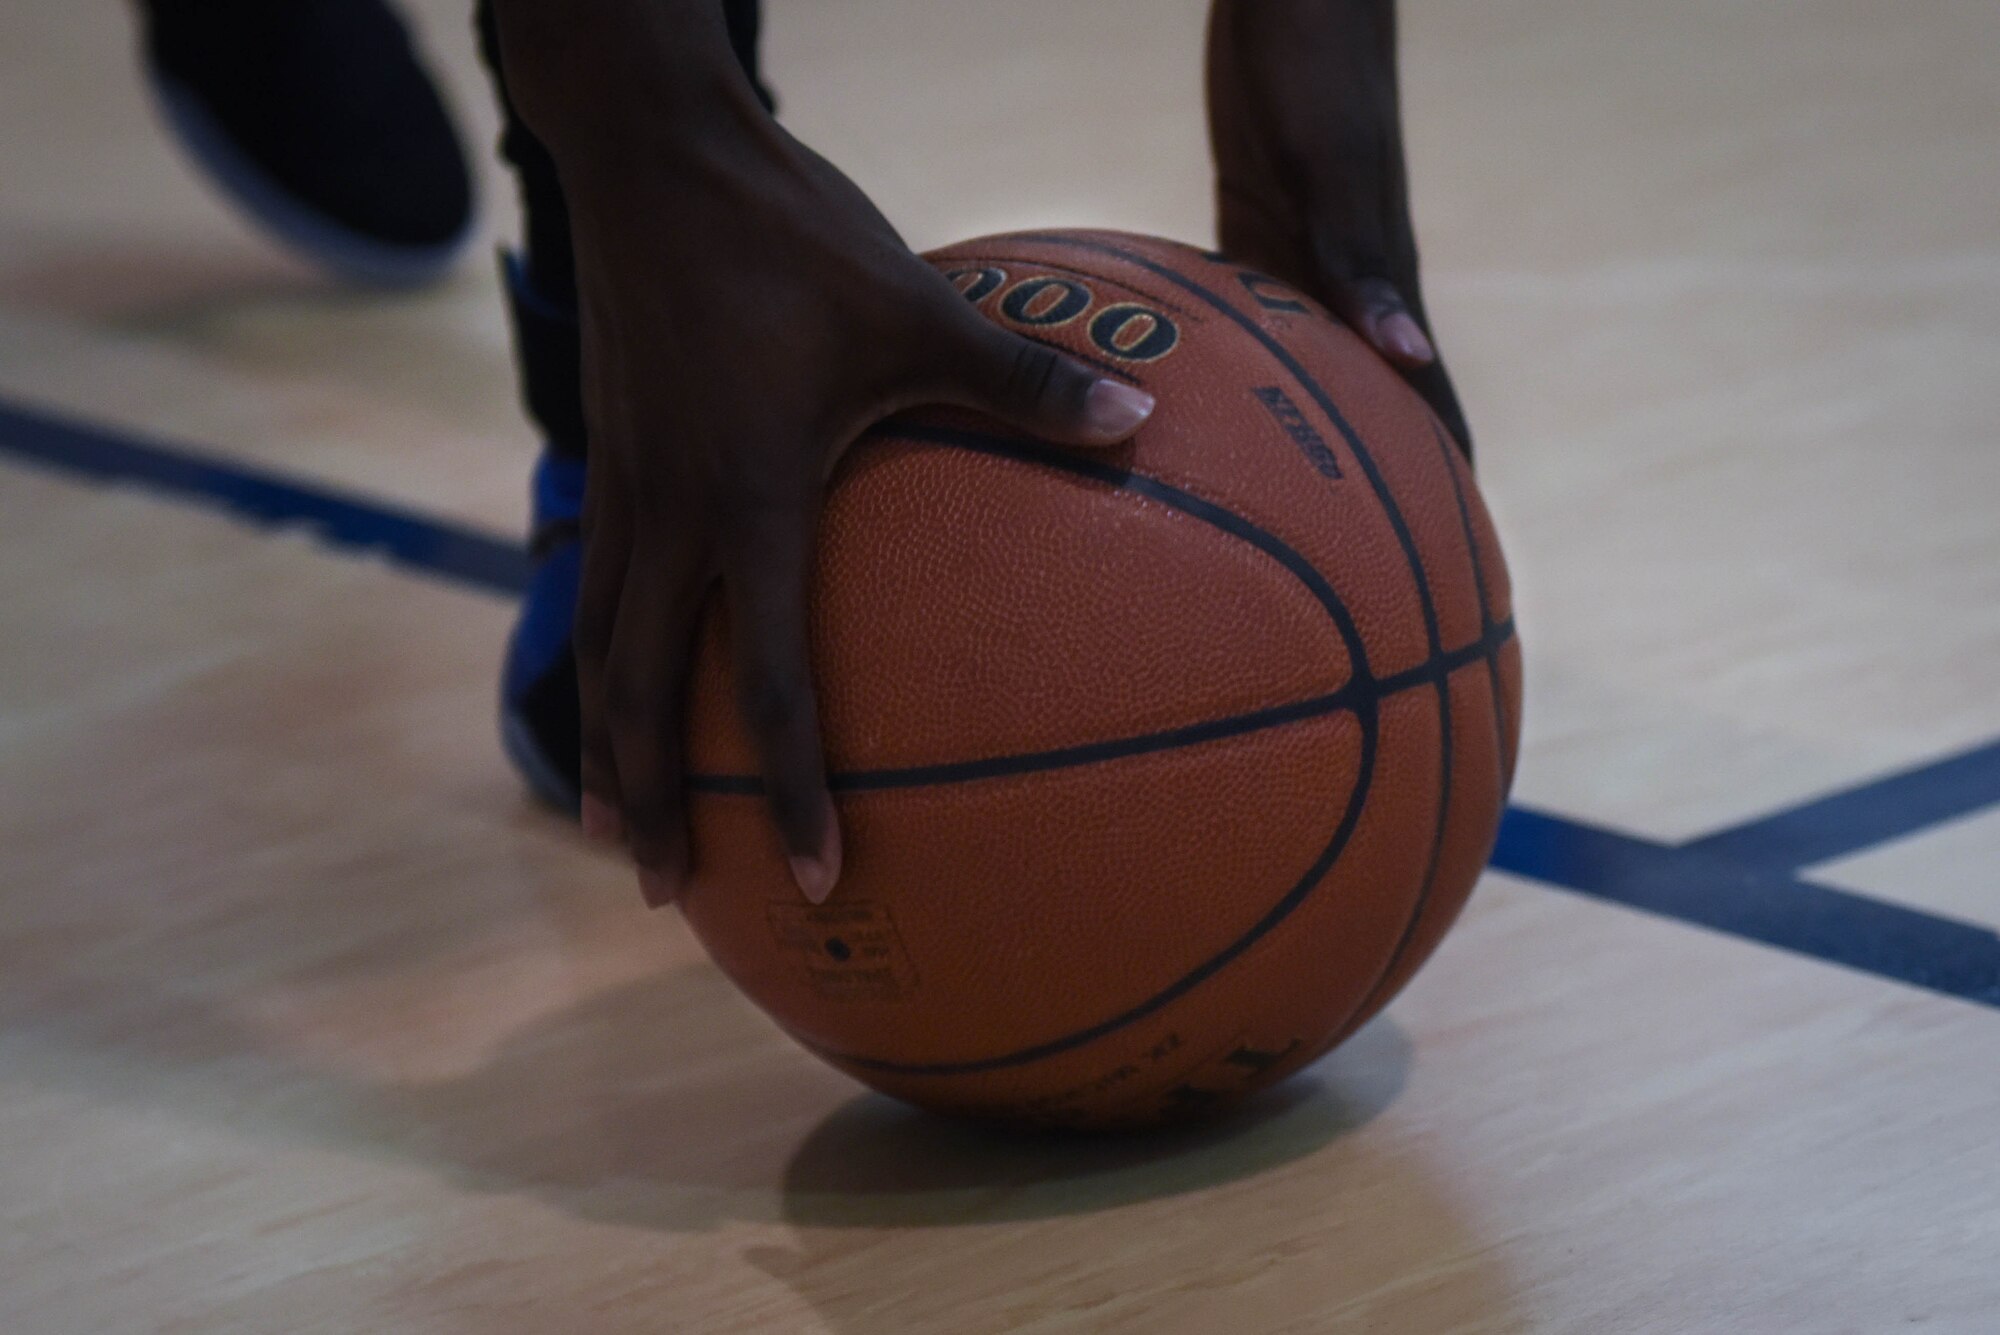 A basketball player reaches for the ball resume play during the first game of the Basketball Championship at Barksdale Air Force Base, La., April 18, 2017. In a double elimination style tournament, the 2nd Security Forces Squadron basketball team came in with zero losses and the 2nd Force Support Squadron basketball team had one loss. (Air Force photo/Airman 1st Class Stuart Bright)